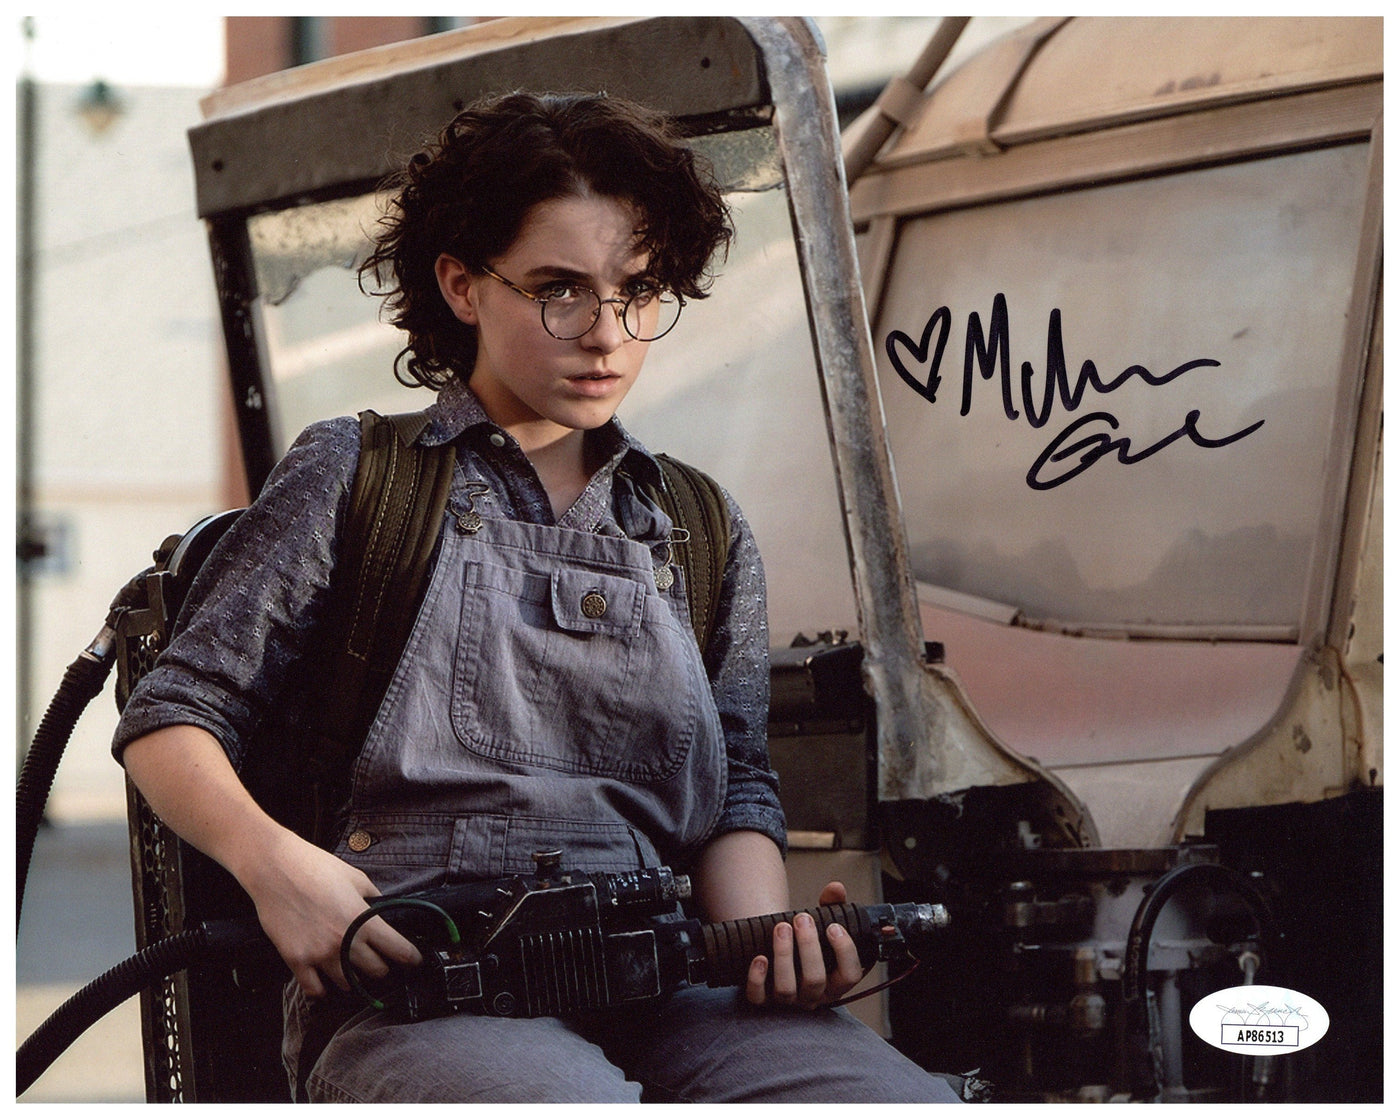 Mckenna Grace Signed 8x10 Photo Ghostbusters Afterlife Phoebe Autographed JSA COA